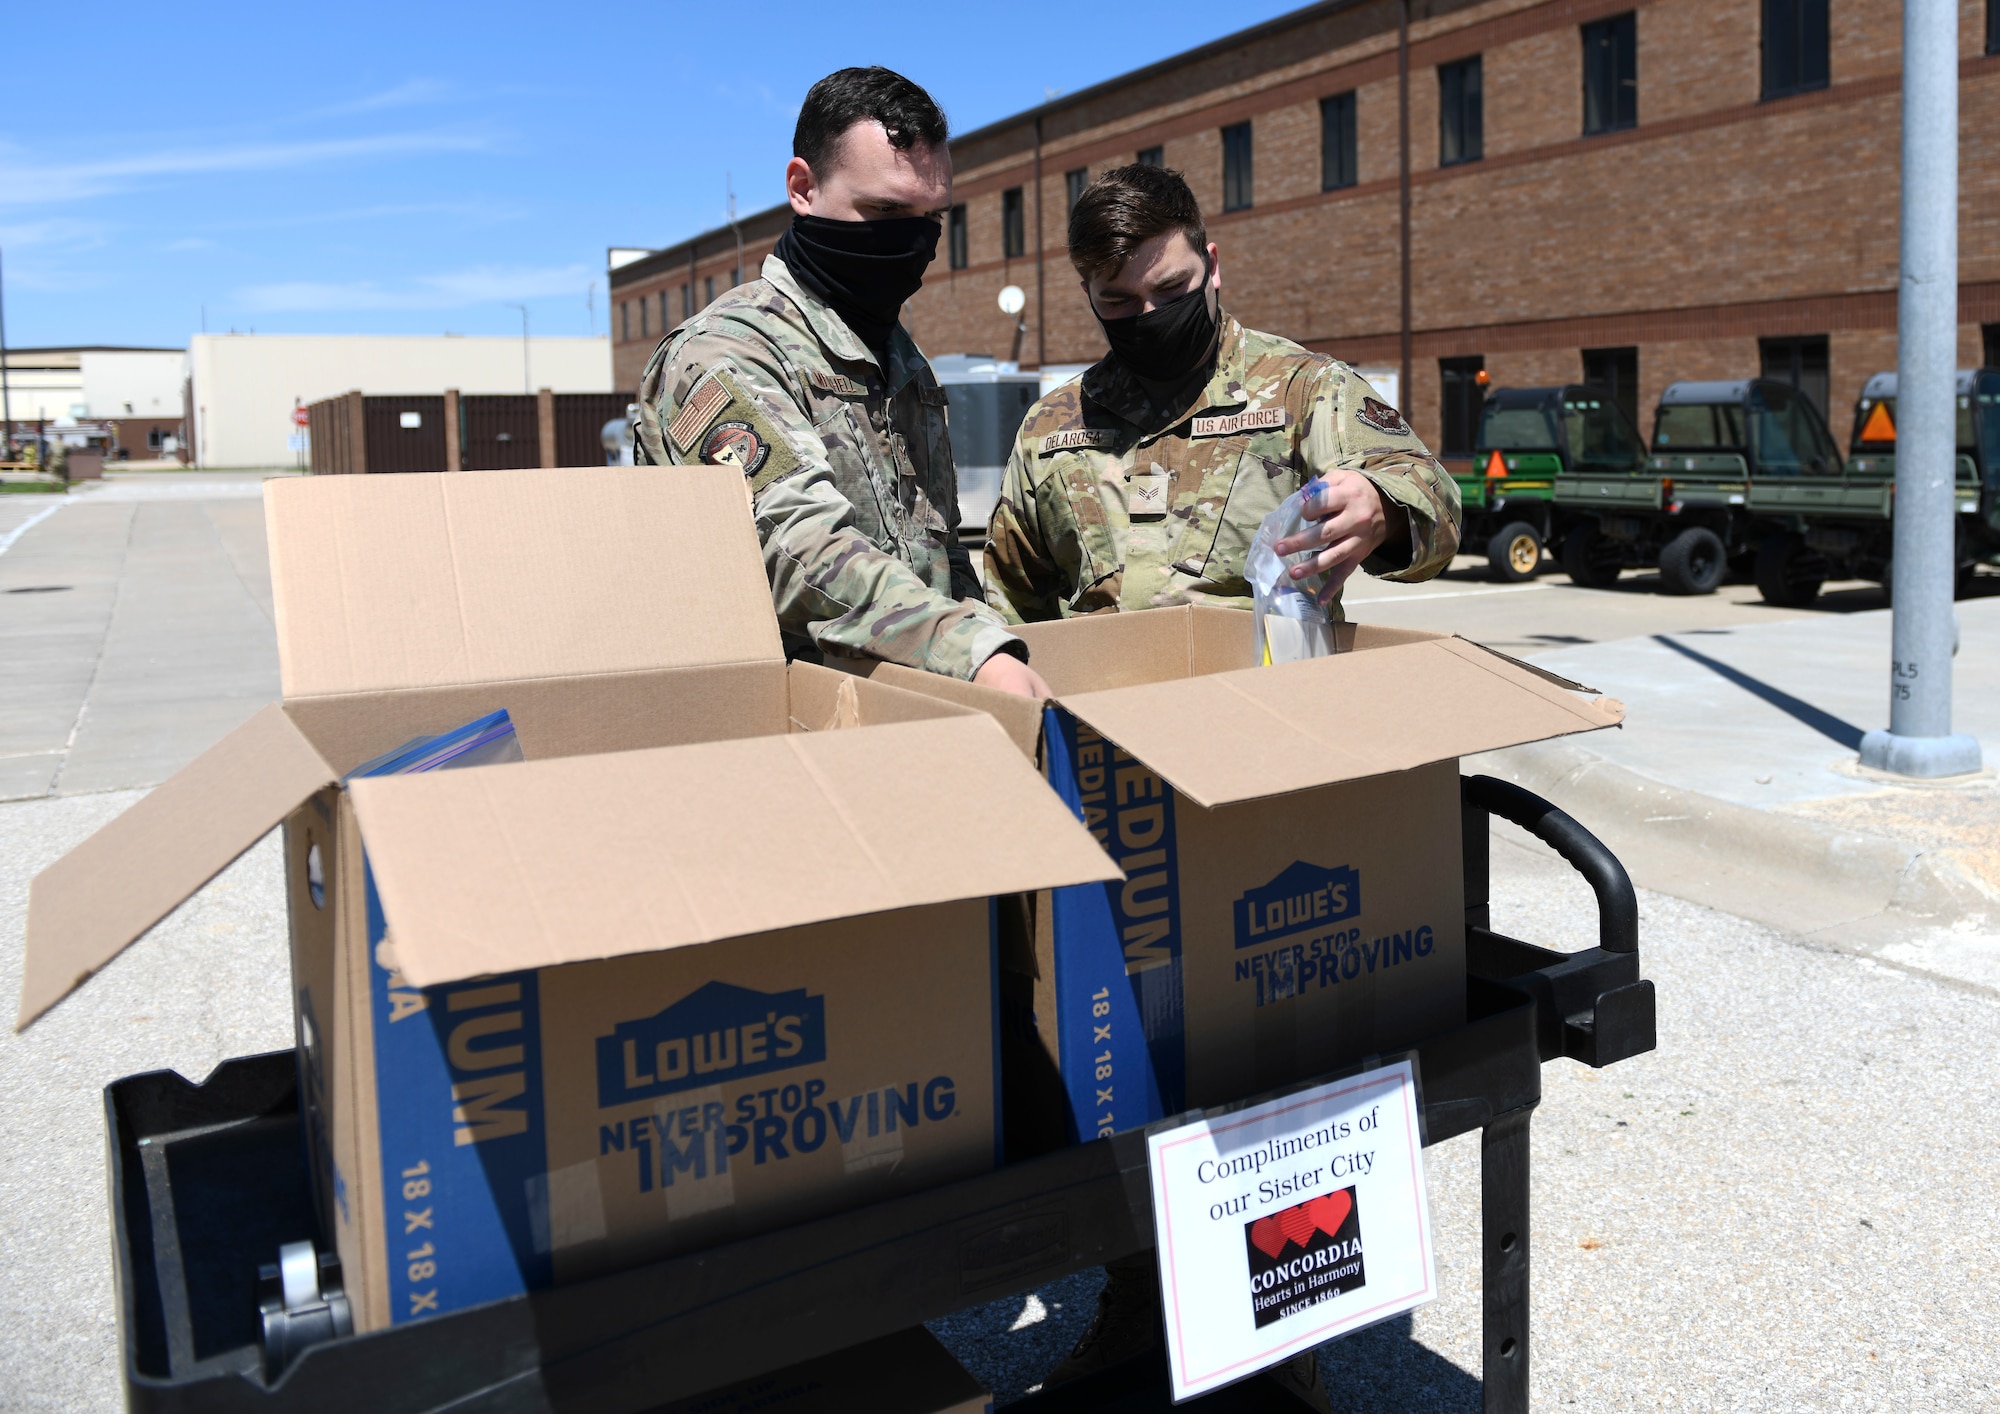 Two 509th Aircraft Maintenance Squadron Airmen grab snack packs at Whiteman Air Force Base, Missouri, May 5, 2021. The 509th AMXS Whiteman Base Community Council Concordia, Missouri, liaison delivered the snacks to support the Airmen through an exercise. (U.S. Air Force photo by Staff Sgt. Sadie Colbert)